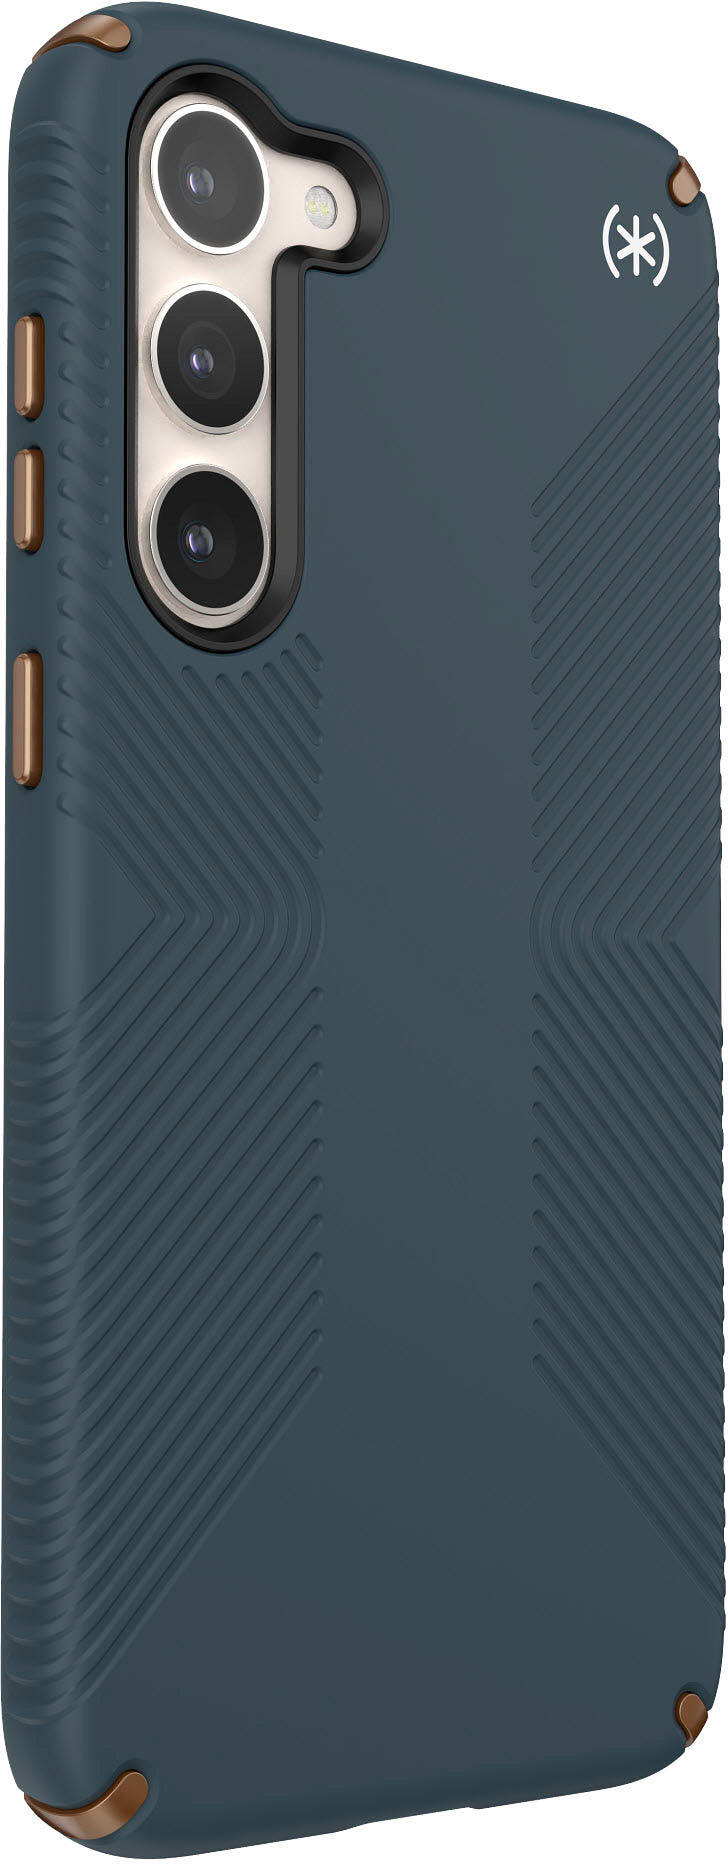 Speck - Presidio2 Grip Case for  Samsung Galaxy S23+ - Charcoal Grey/Cool Bronze/White_2